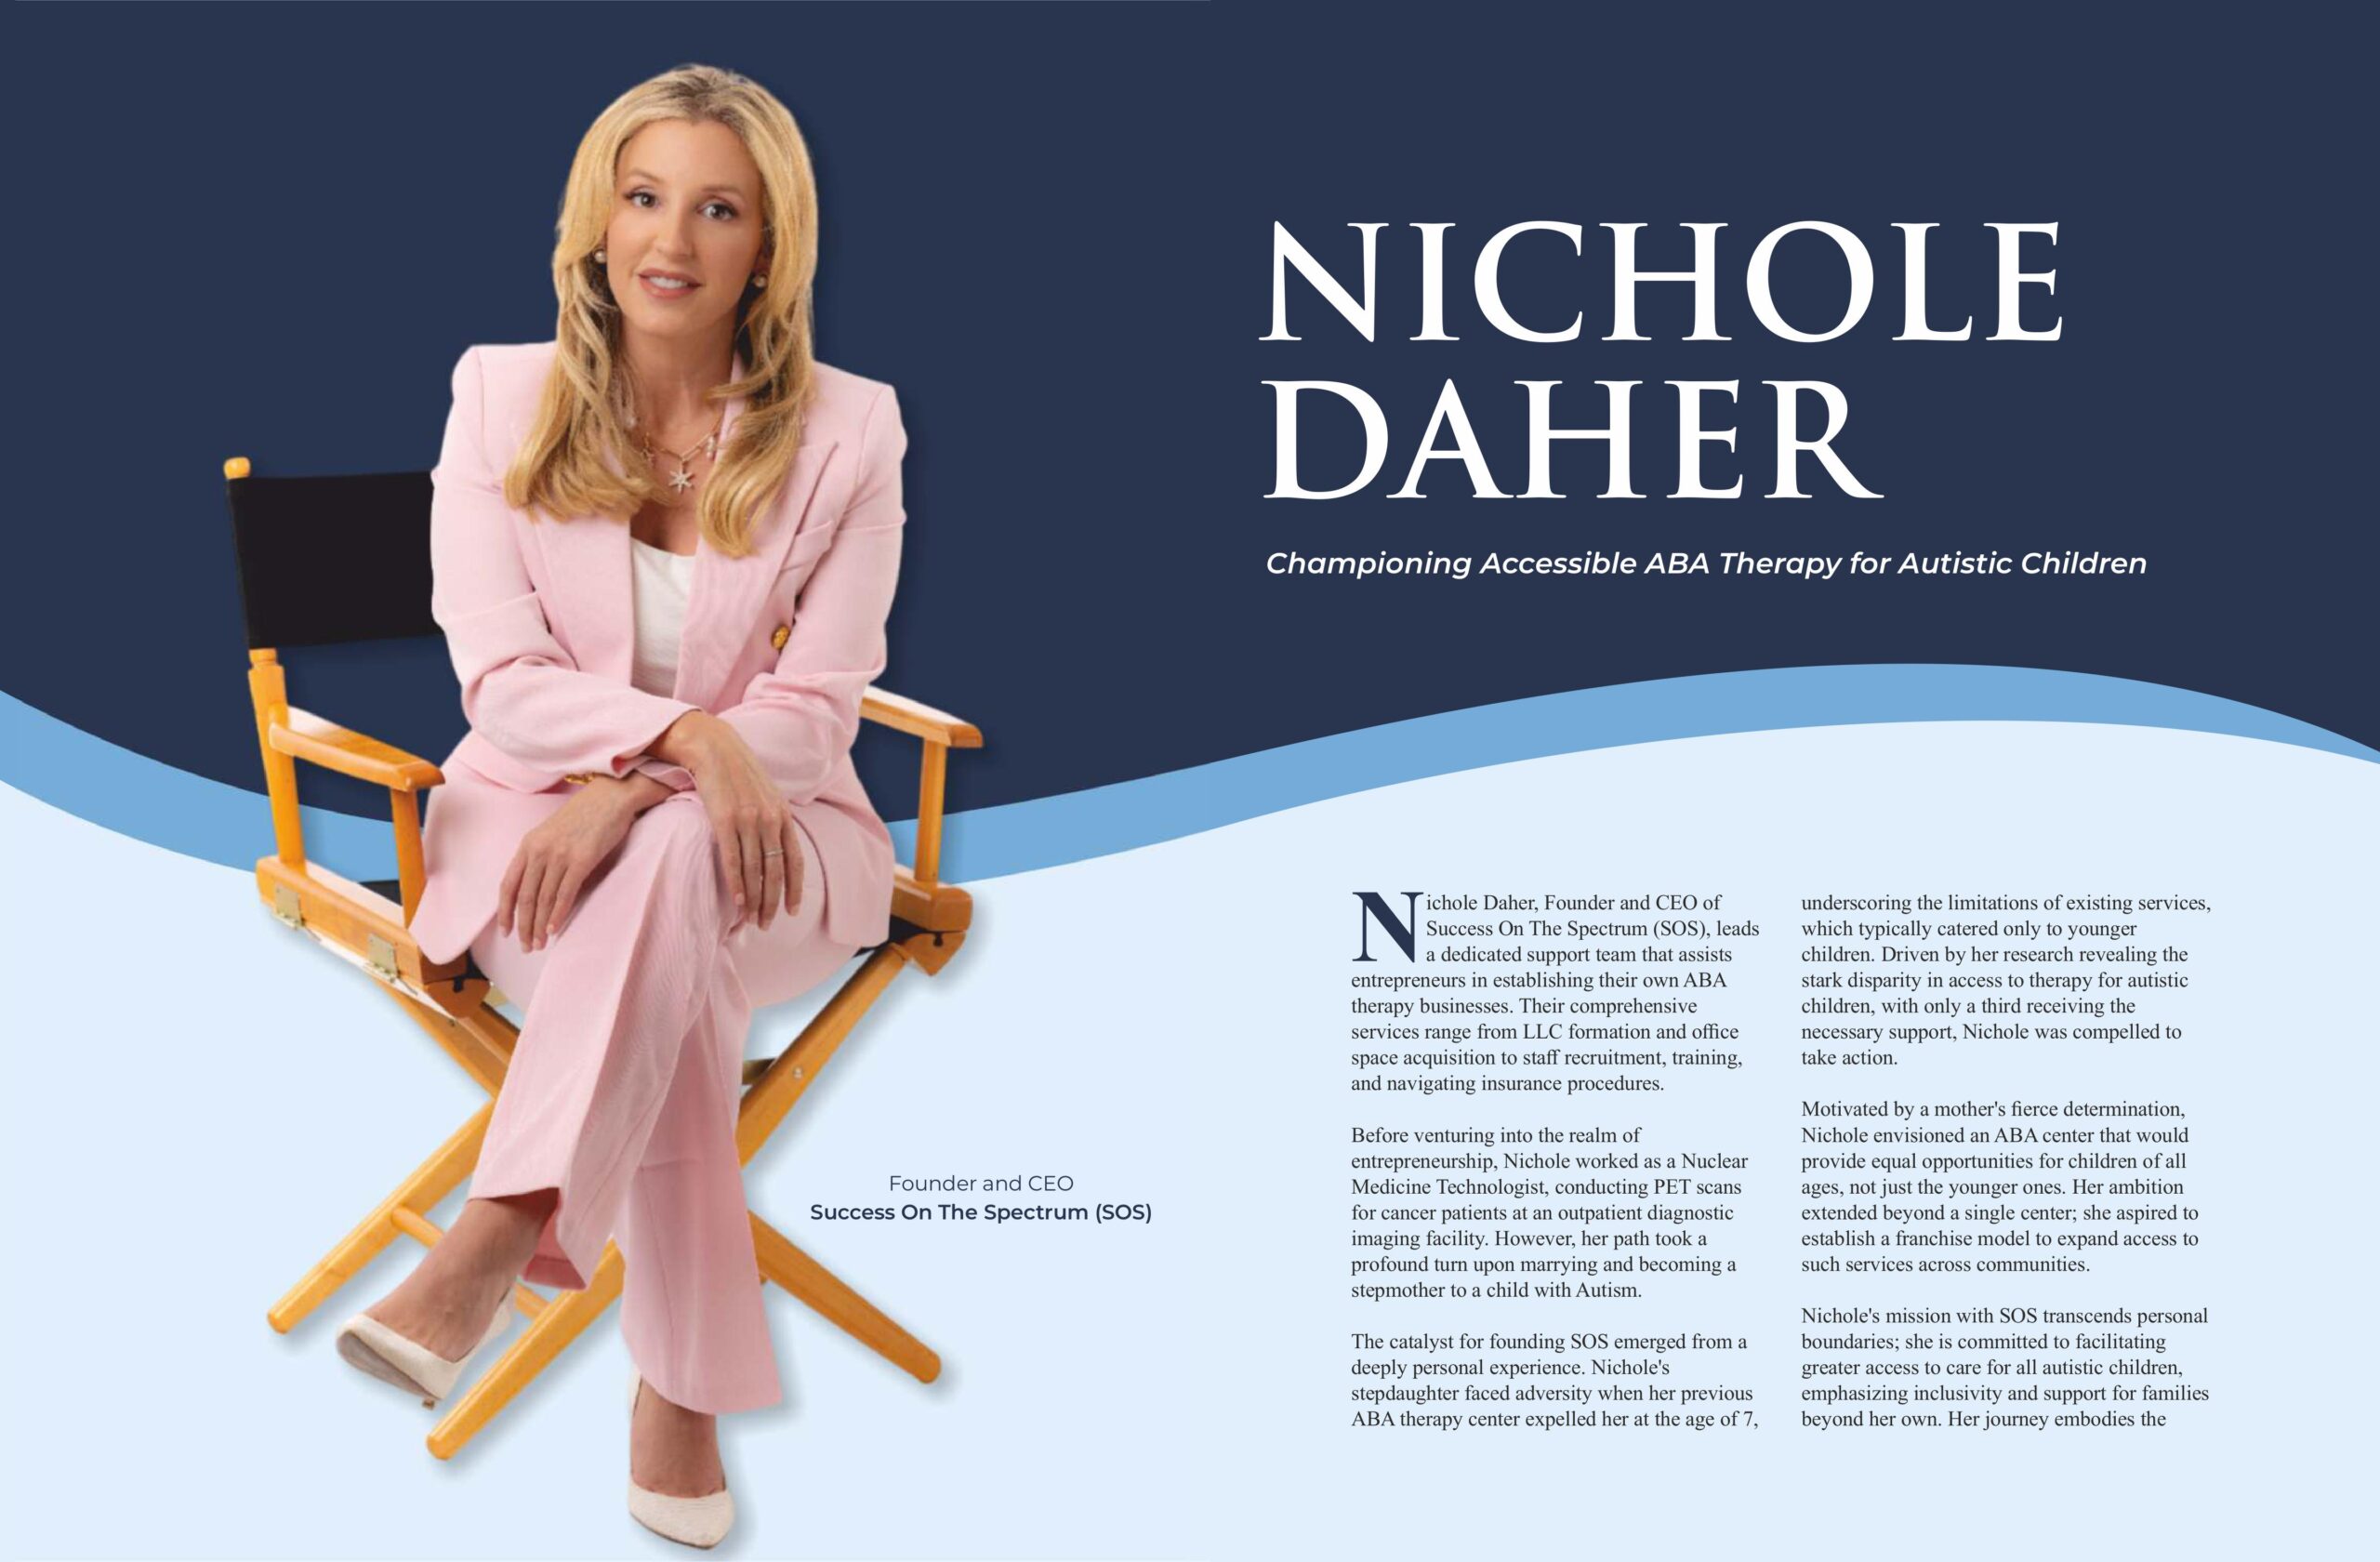 Nichole Daher, World’s Most Prominent Women Leaders in Business